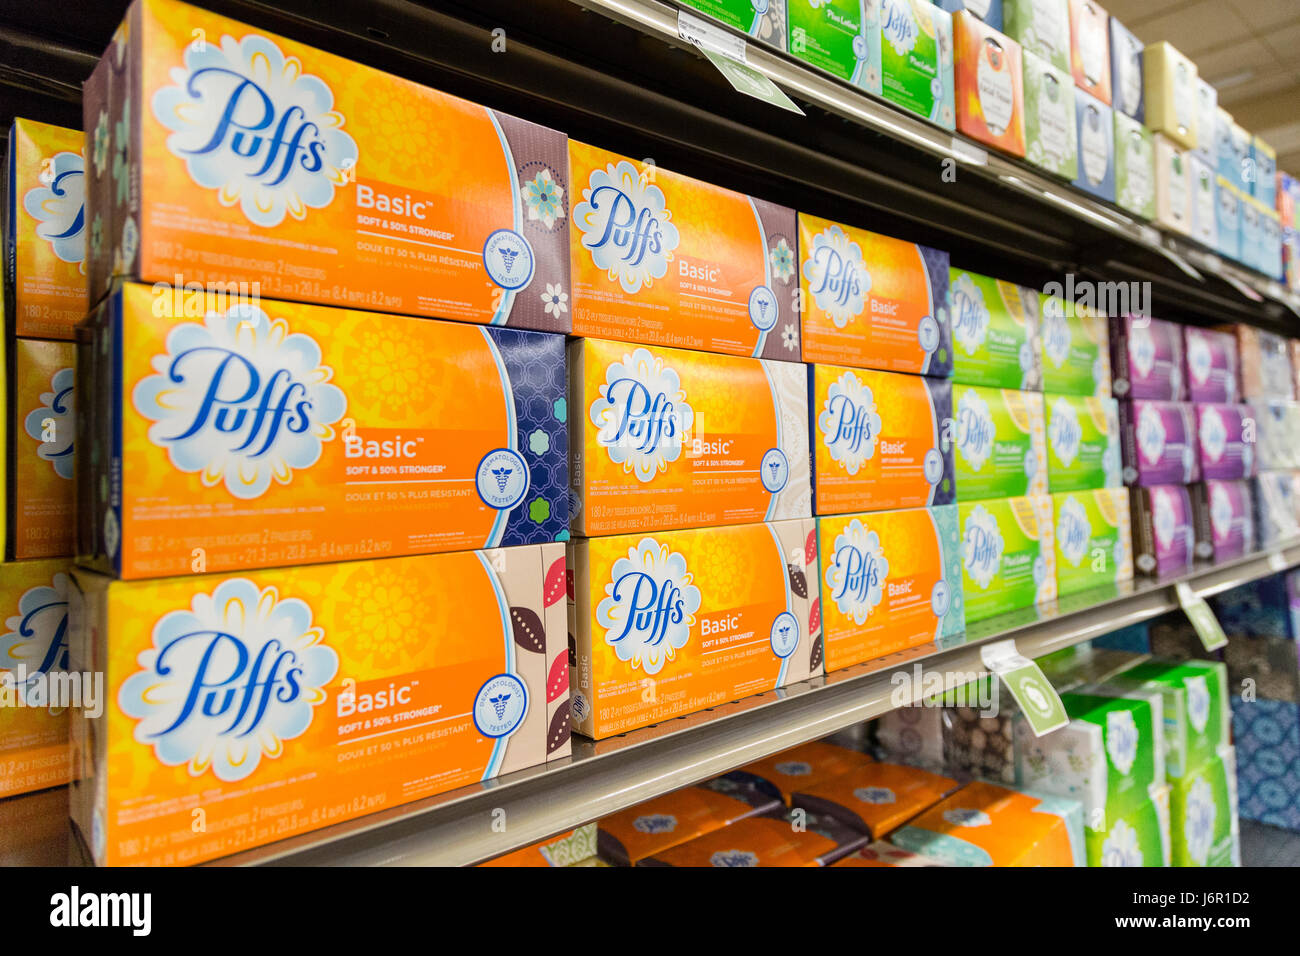 boxes of Puffs brand tissues stacked on grocery store shelves Stock Photo